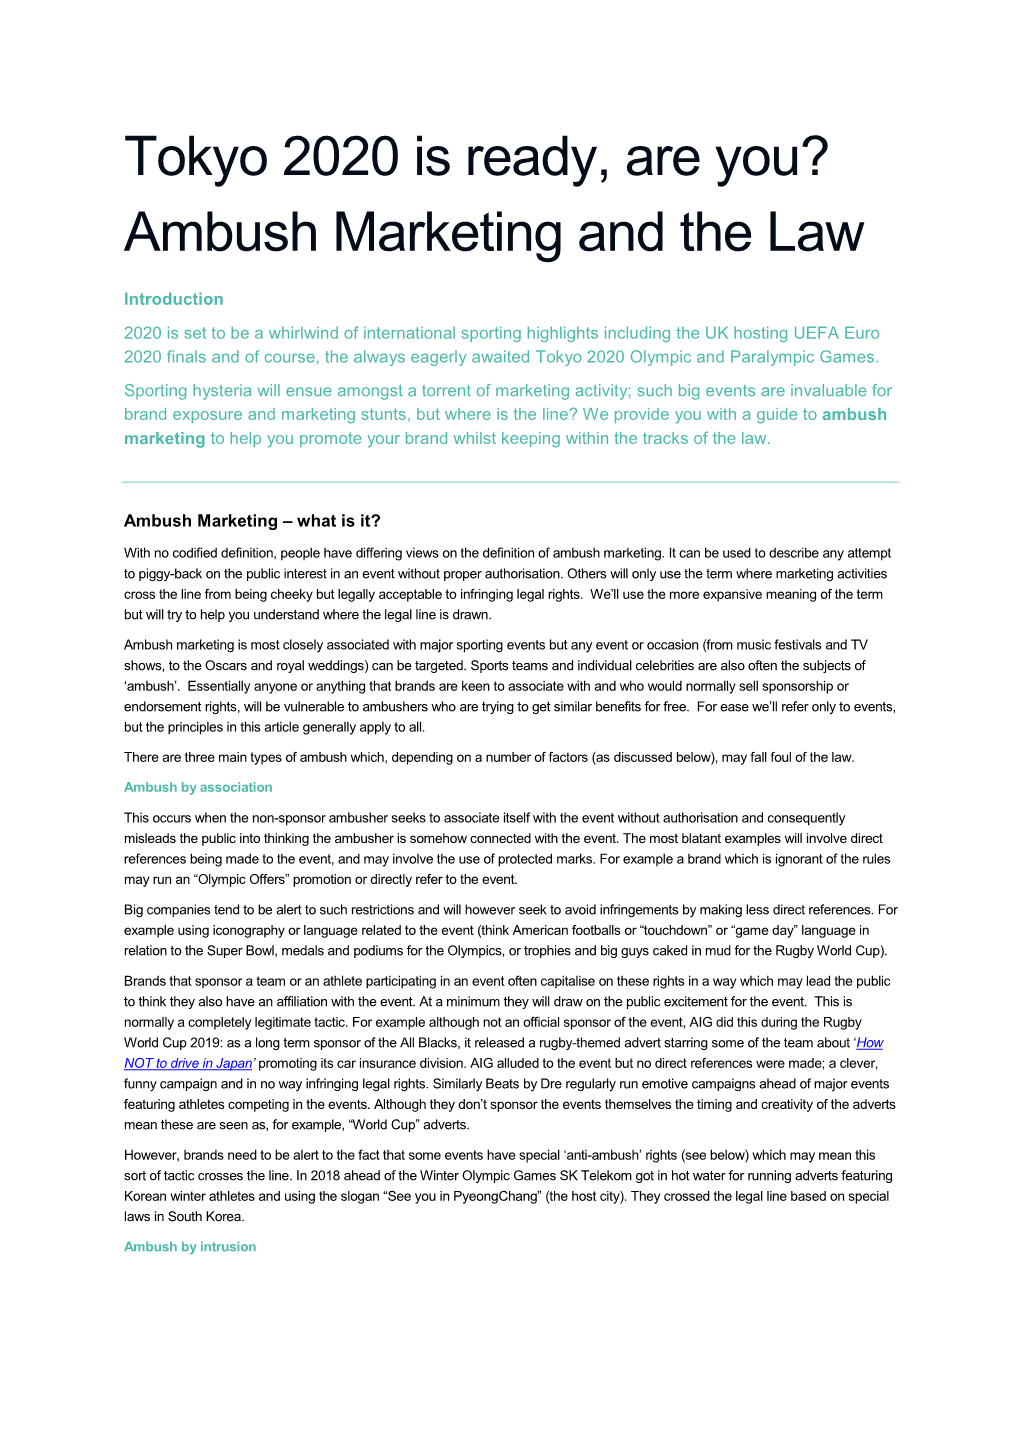 Tokyo 2020 Is Ready, Are You? Ambush Marketing and the Law